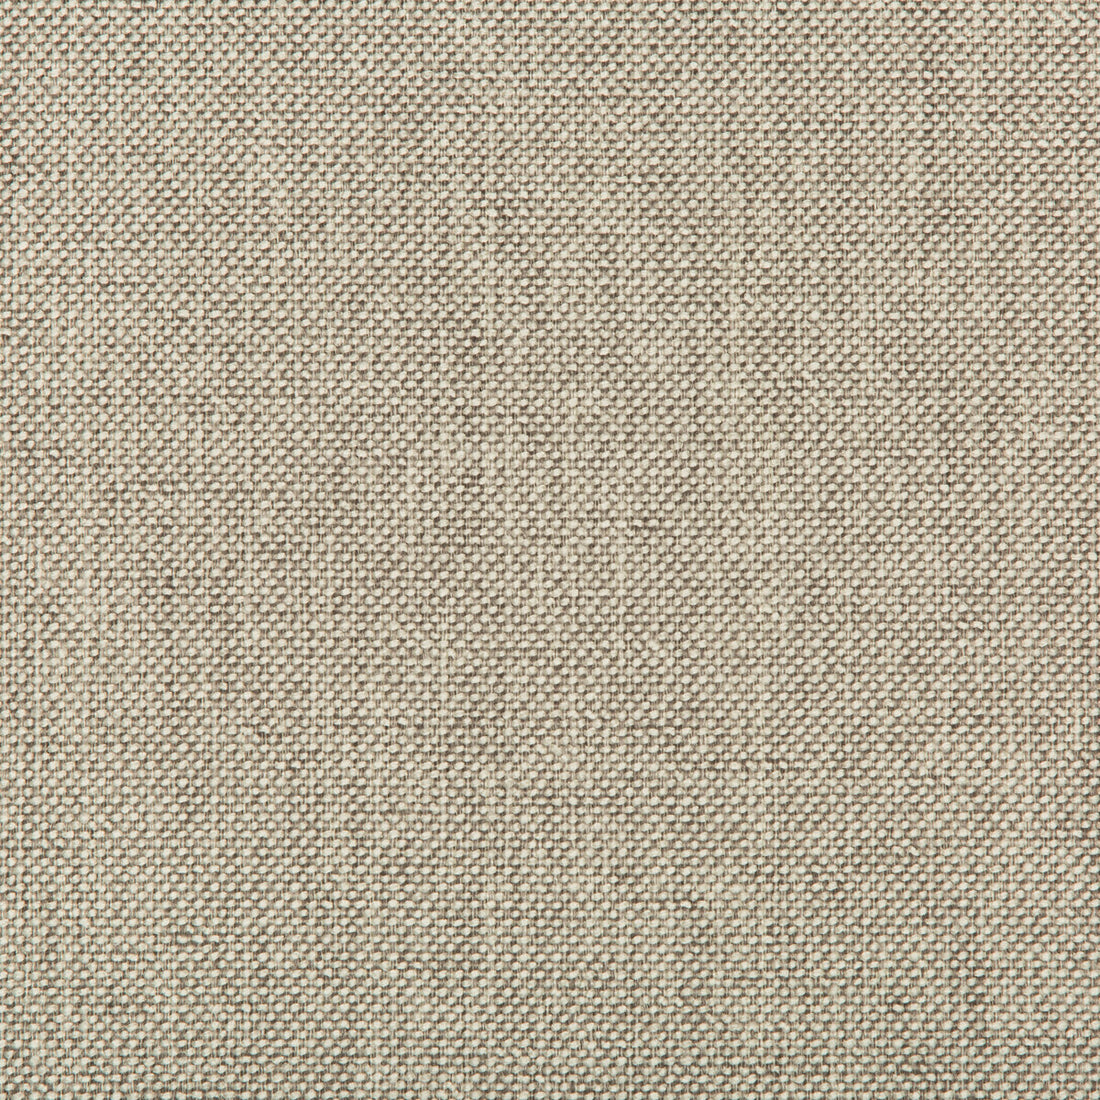 Williams fabric in pumice color - pattern 35744.1111.0 - by Kravet Contract in the Value Kravetarmor collection